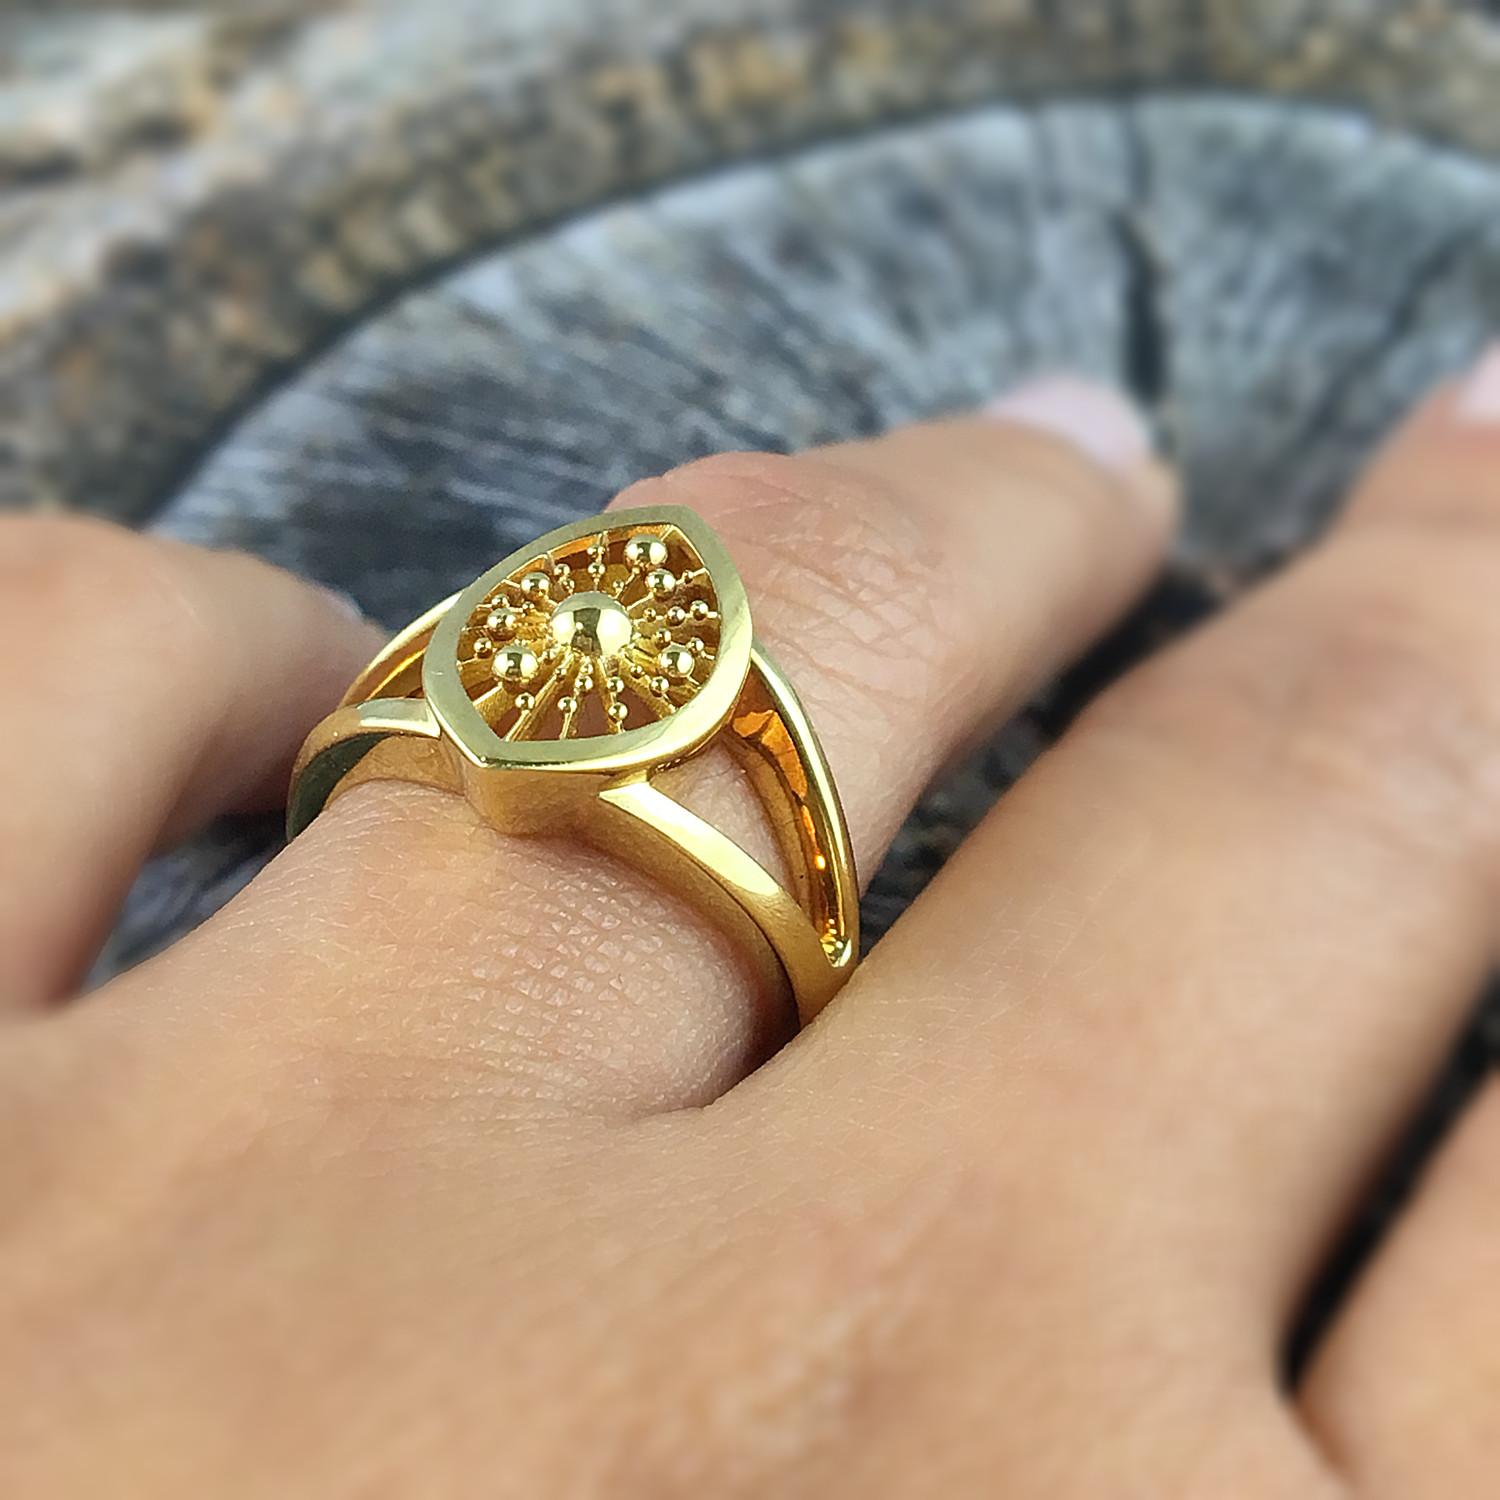 The 'Soleil' Marquise Ring features a marquise shaped sunburst with polished split bands. It has a plain polished band at the back. Suitable for all ages.

Made in 9 karat yellow gold. AU Ring Size L or M. US Ring 5 1/2 or 6. EU Ring Size 51 3/4 or